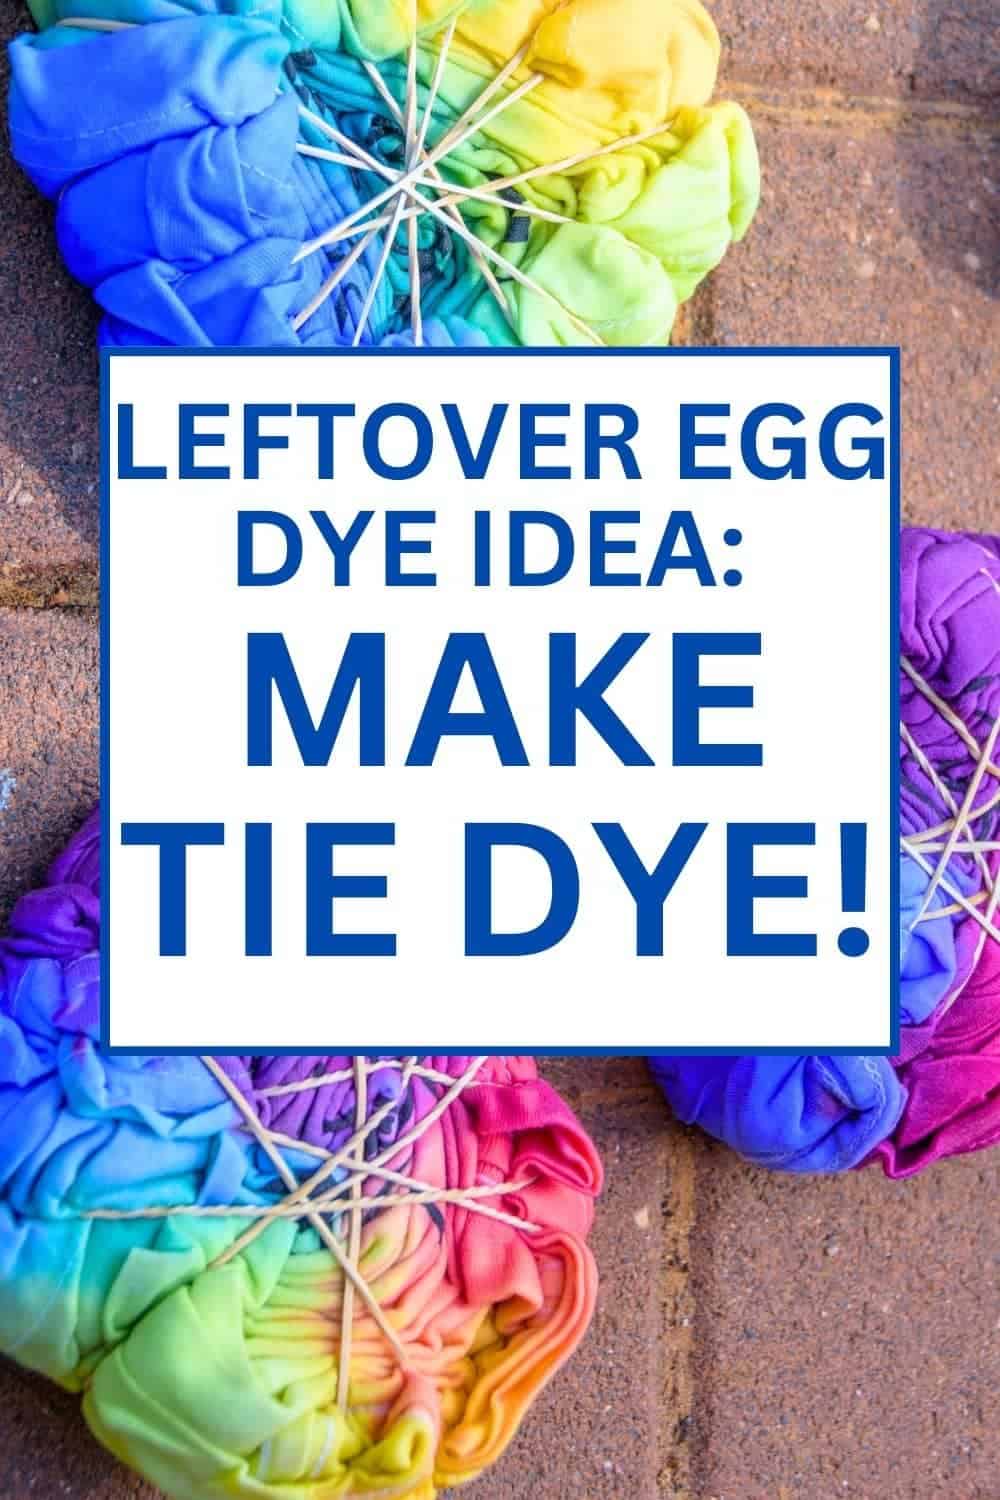 LEFTOVER EGG DYE IDEA MAKE TIE DYE COLORS TEXT OVER TIE DIED SHIRTS